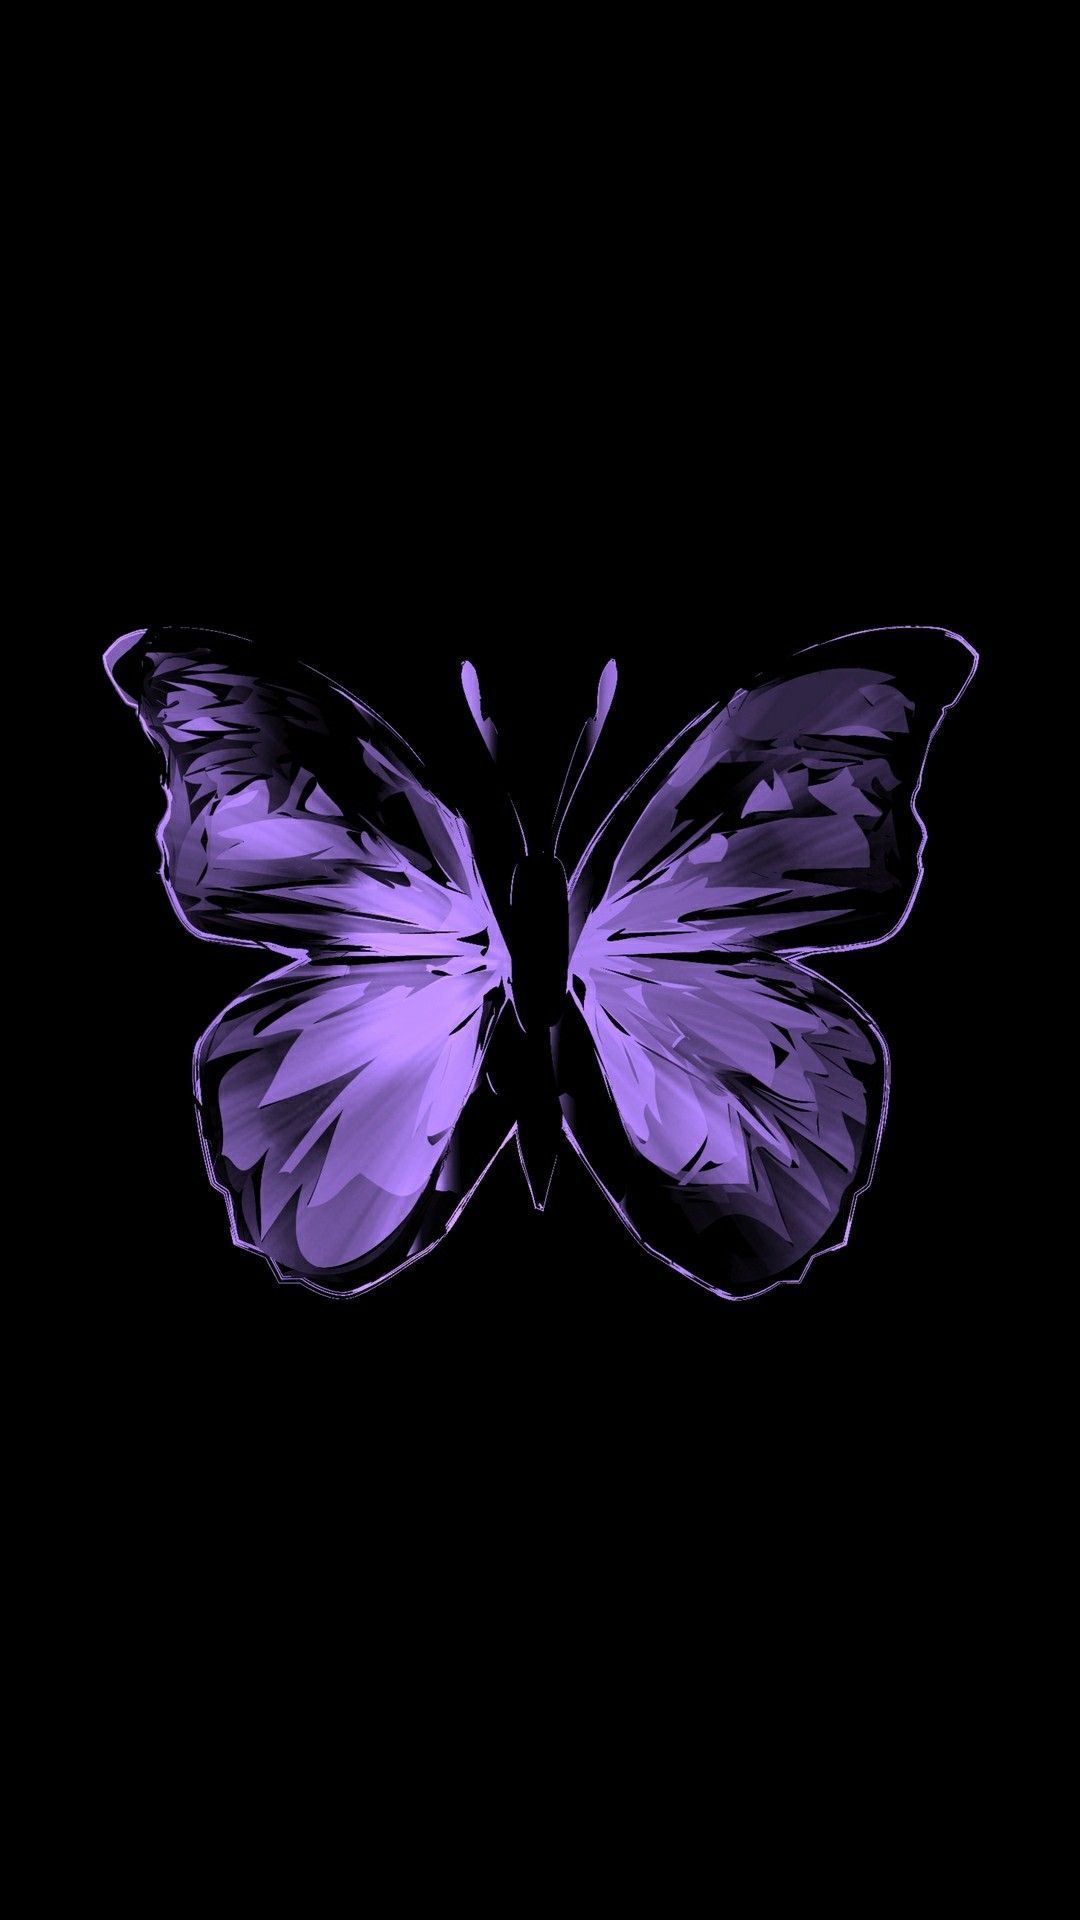 Aesthetic Butterfly Purple Wallpapers Wallpaper Cave